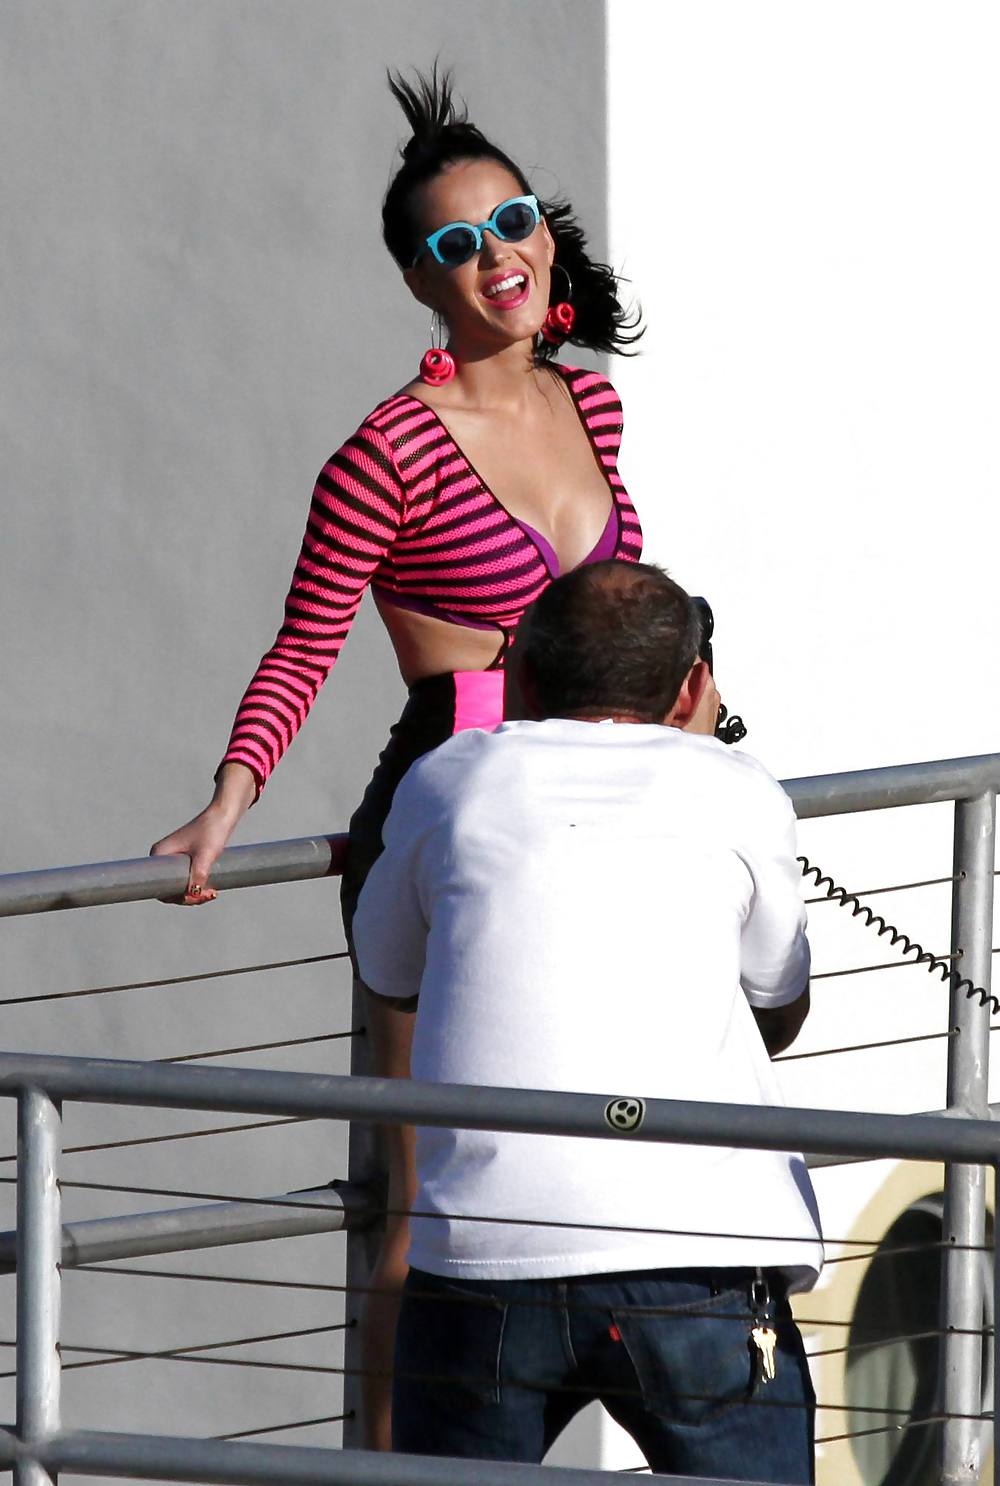 Katy Perry Rooftop Photoshoot in Miami #4065750